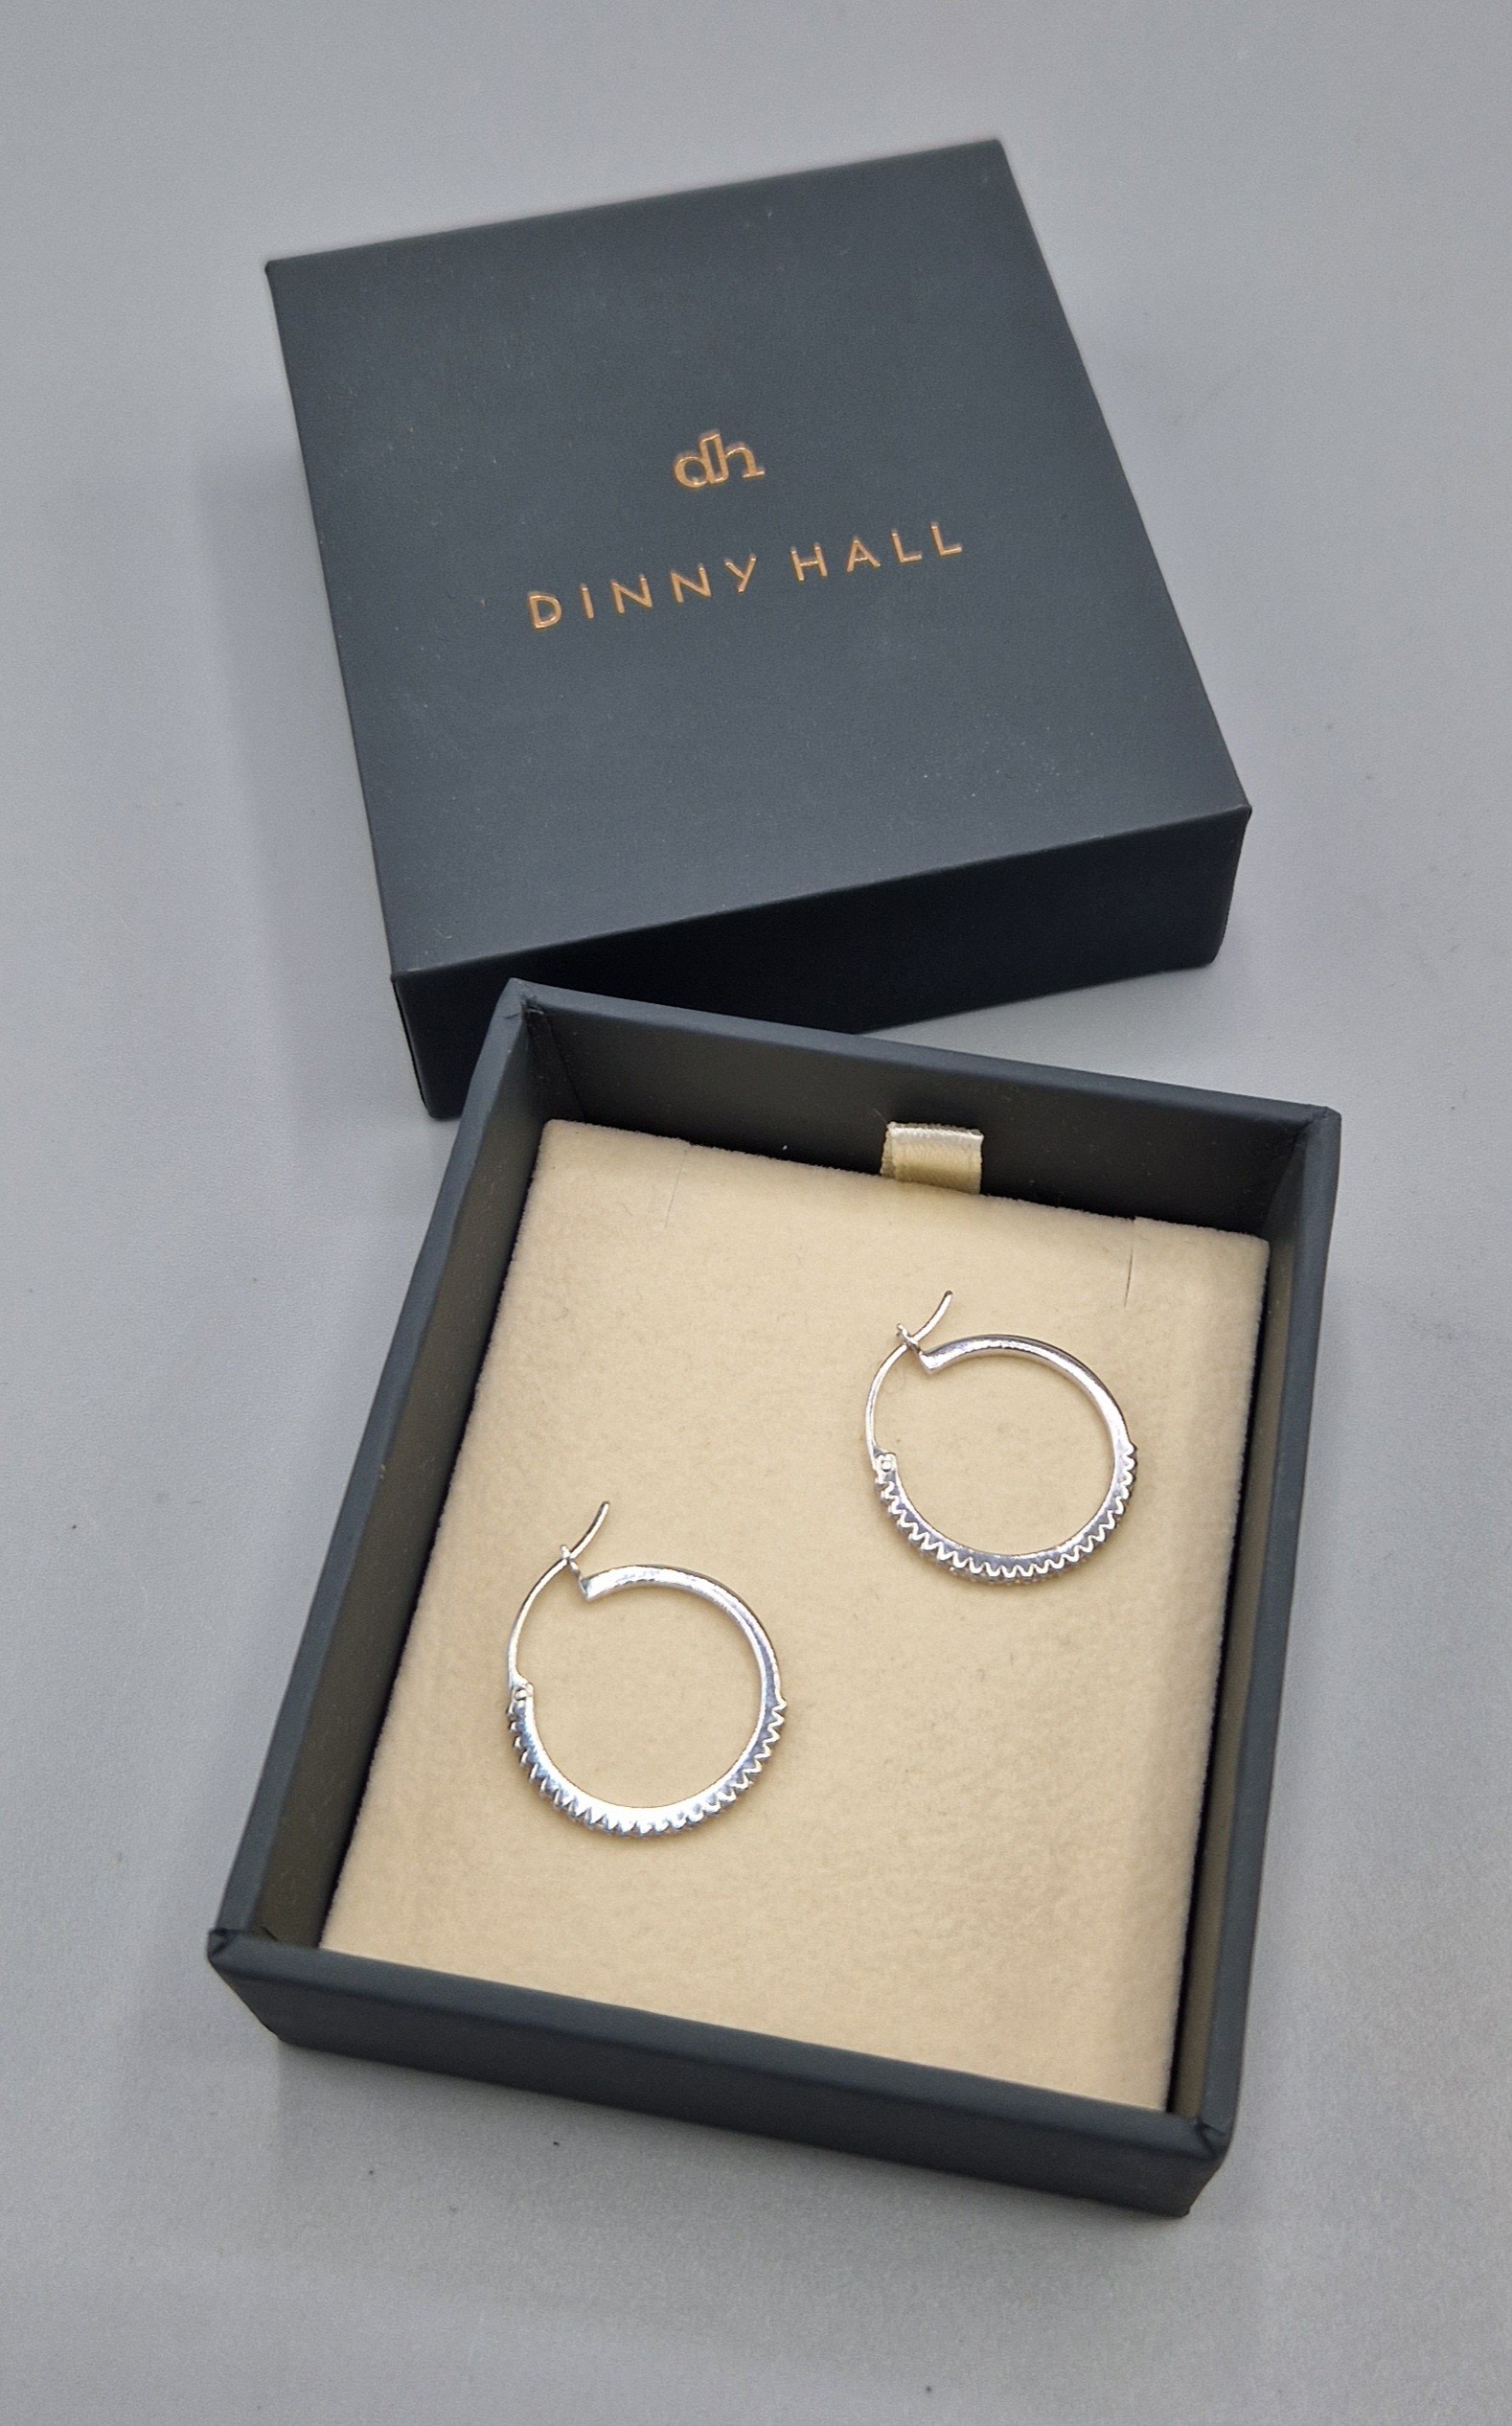 A pair of 14ct white gold hoop earring set with diamonds by Dinny Hall, 2.2gms - Image 2 of 2